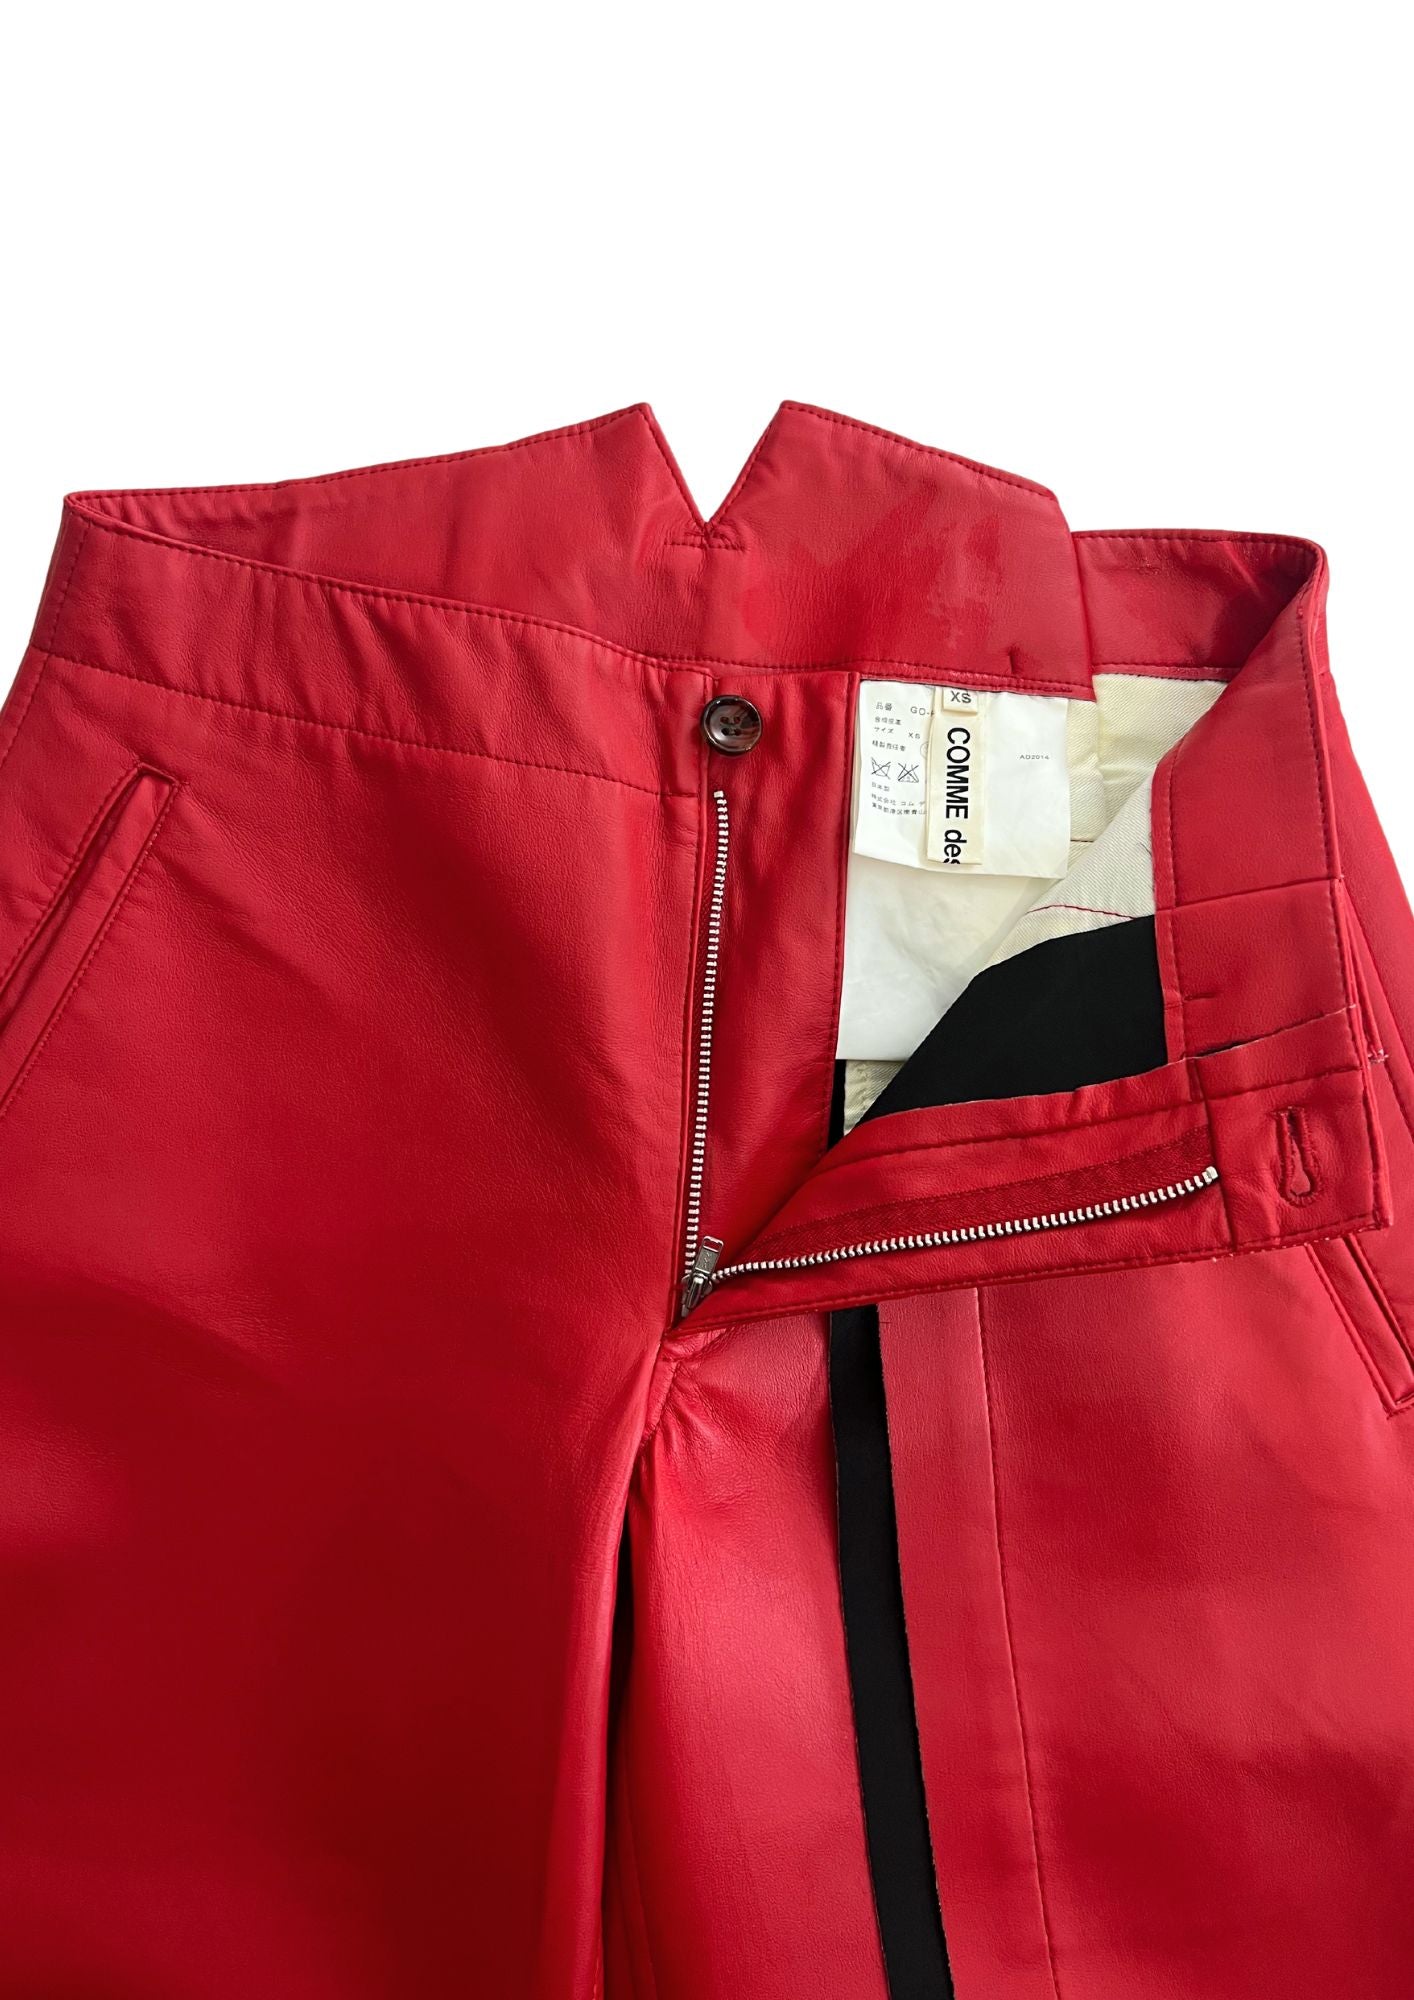 COMME des GARÇONS AD2014 Rose and Blood Eco Leather Balloon Pants